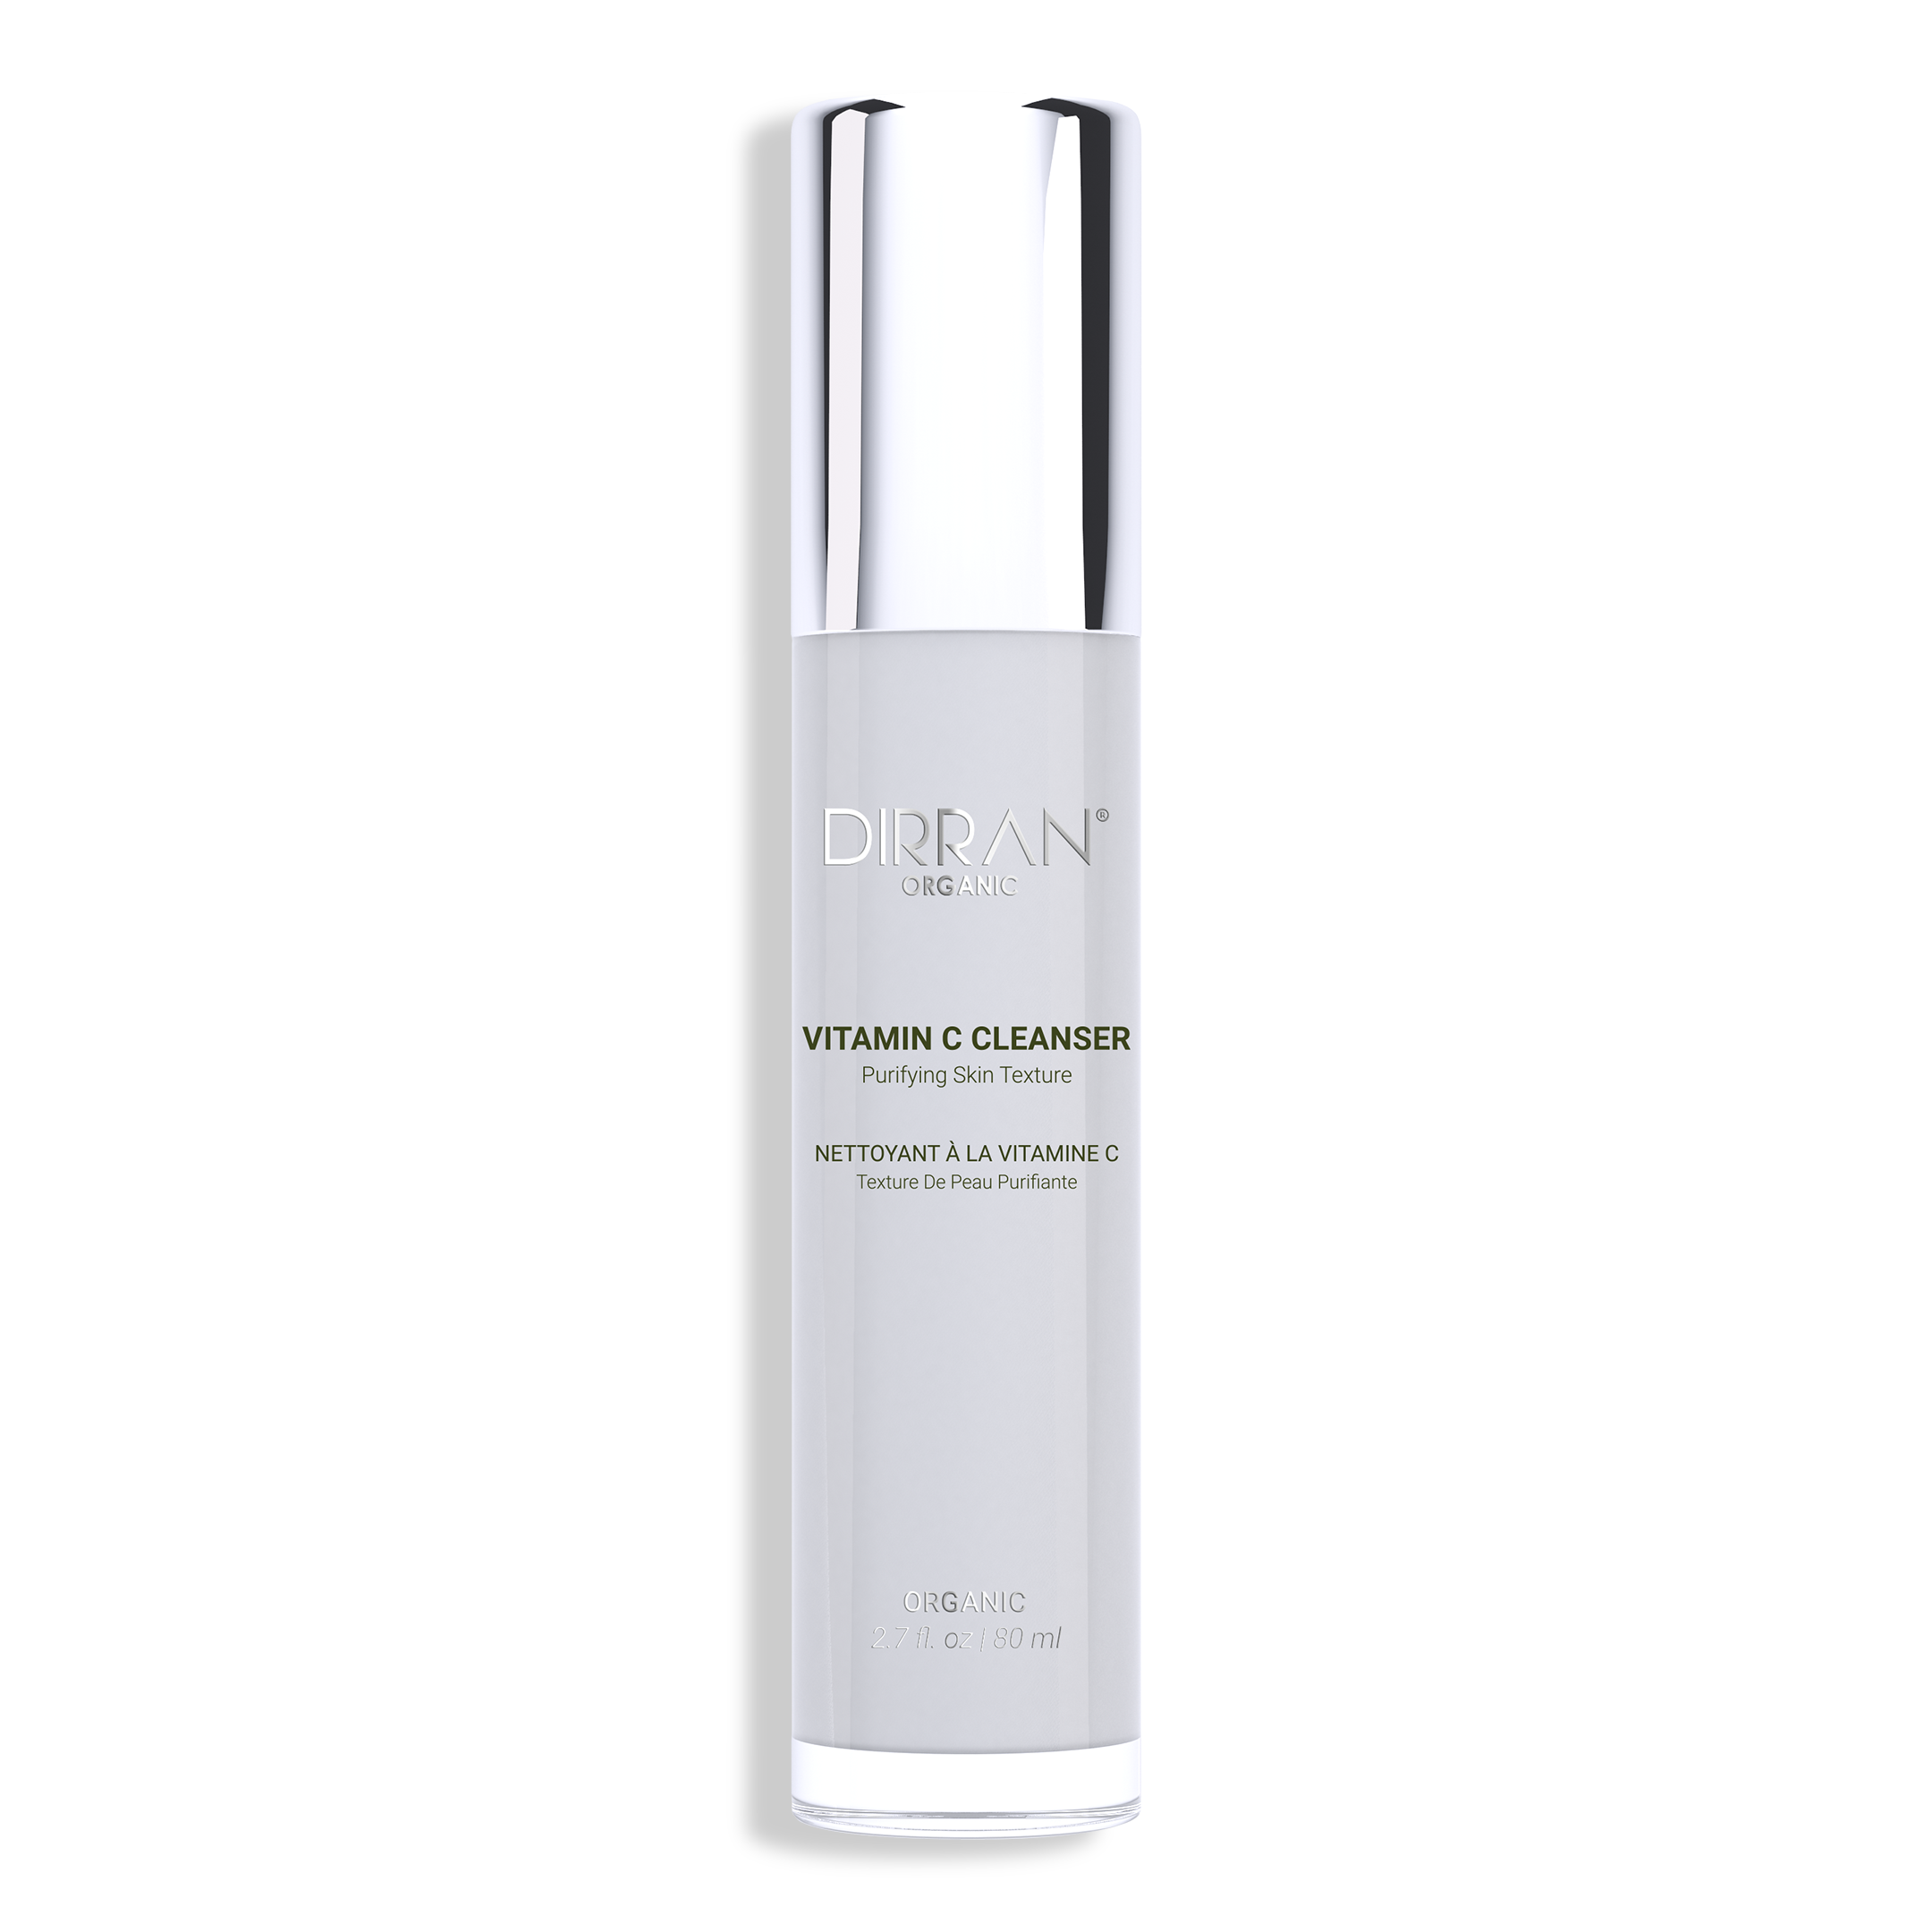 VITAMIN C CLEANSER Purifying Skin Texture